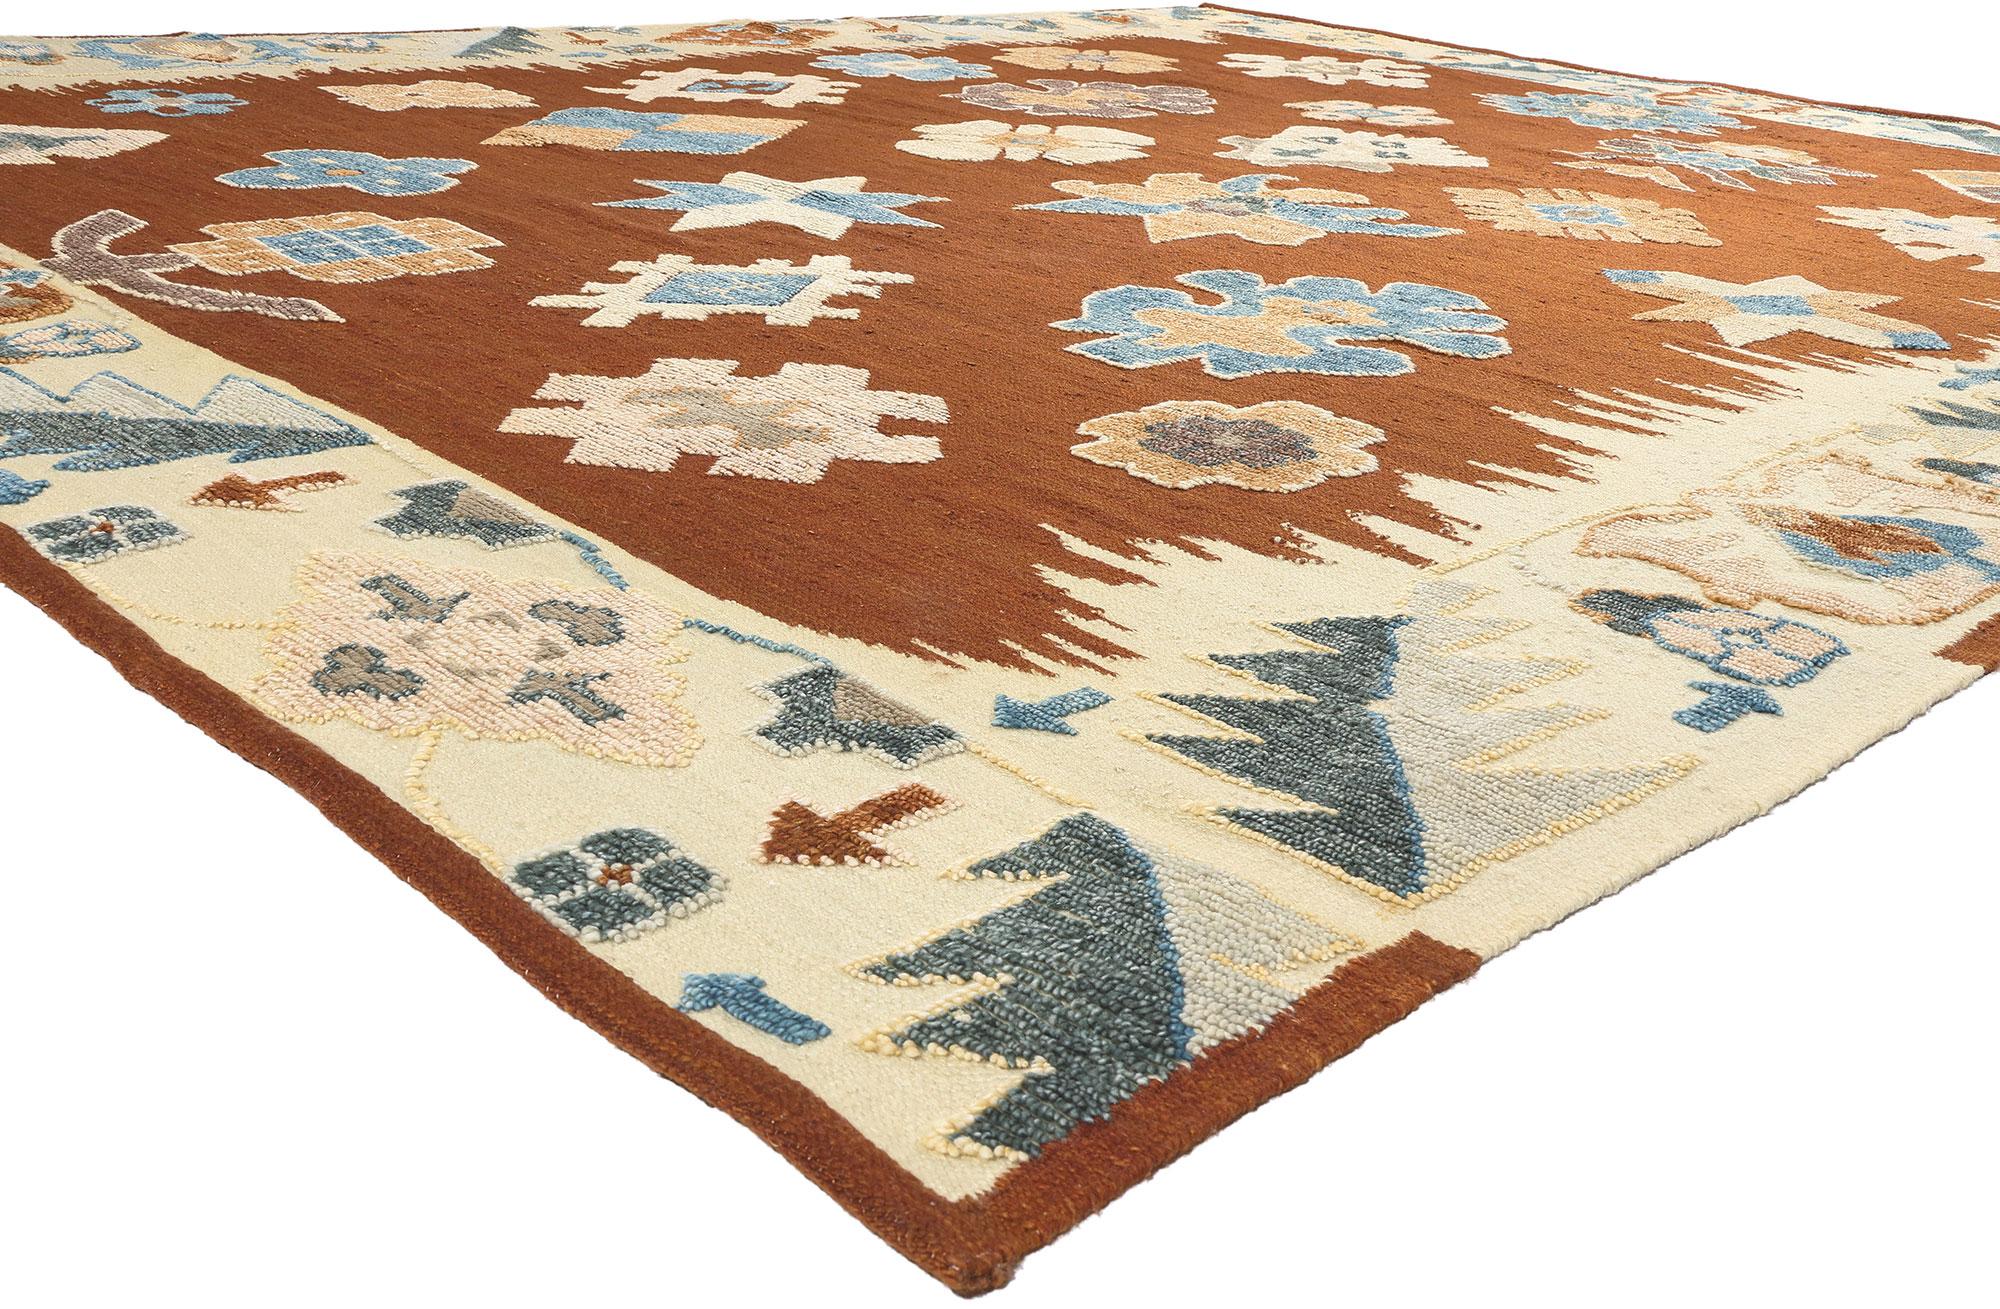 30893 New Modern Style Oushak High-Low Rug, 12'08 x 15'07. Showcasing a raised design with incredible detail and texture, this Oushak high-low rug is a captivating vision of woven beauty. The geometric pattern and earthy colorway woven into this